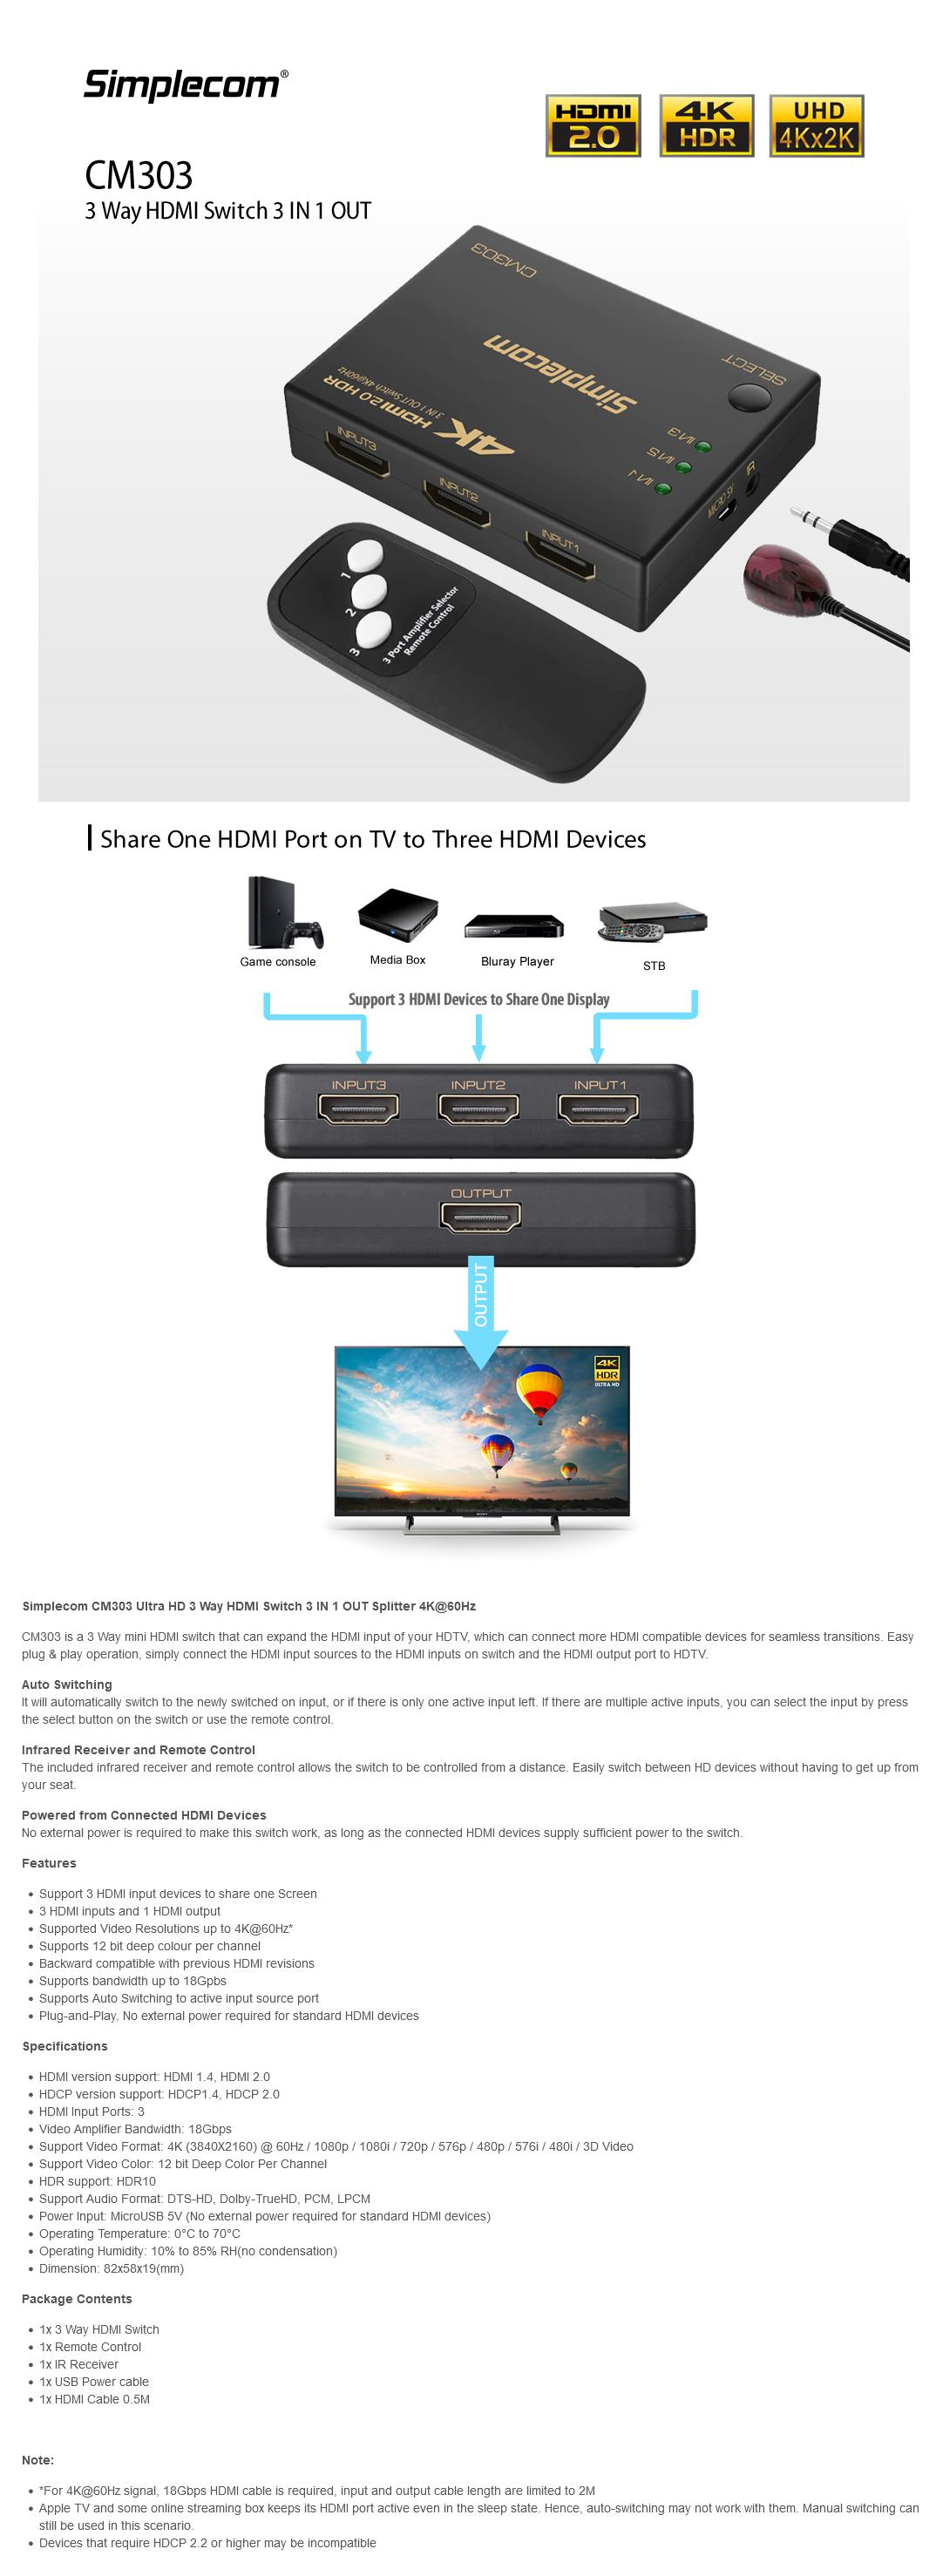 A large marketing image providing additional information about the product Simplecom CM303 3 Way HDMI 2.0 Switch 3 In 1 Out Splitter HDCP 2.0 4K 60Hz HDR - Additional alt info not provided